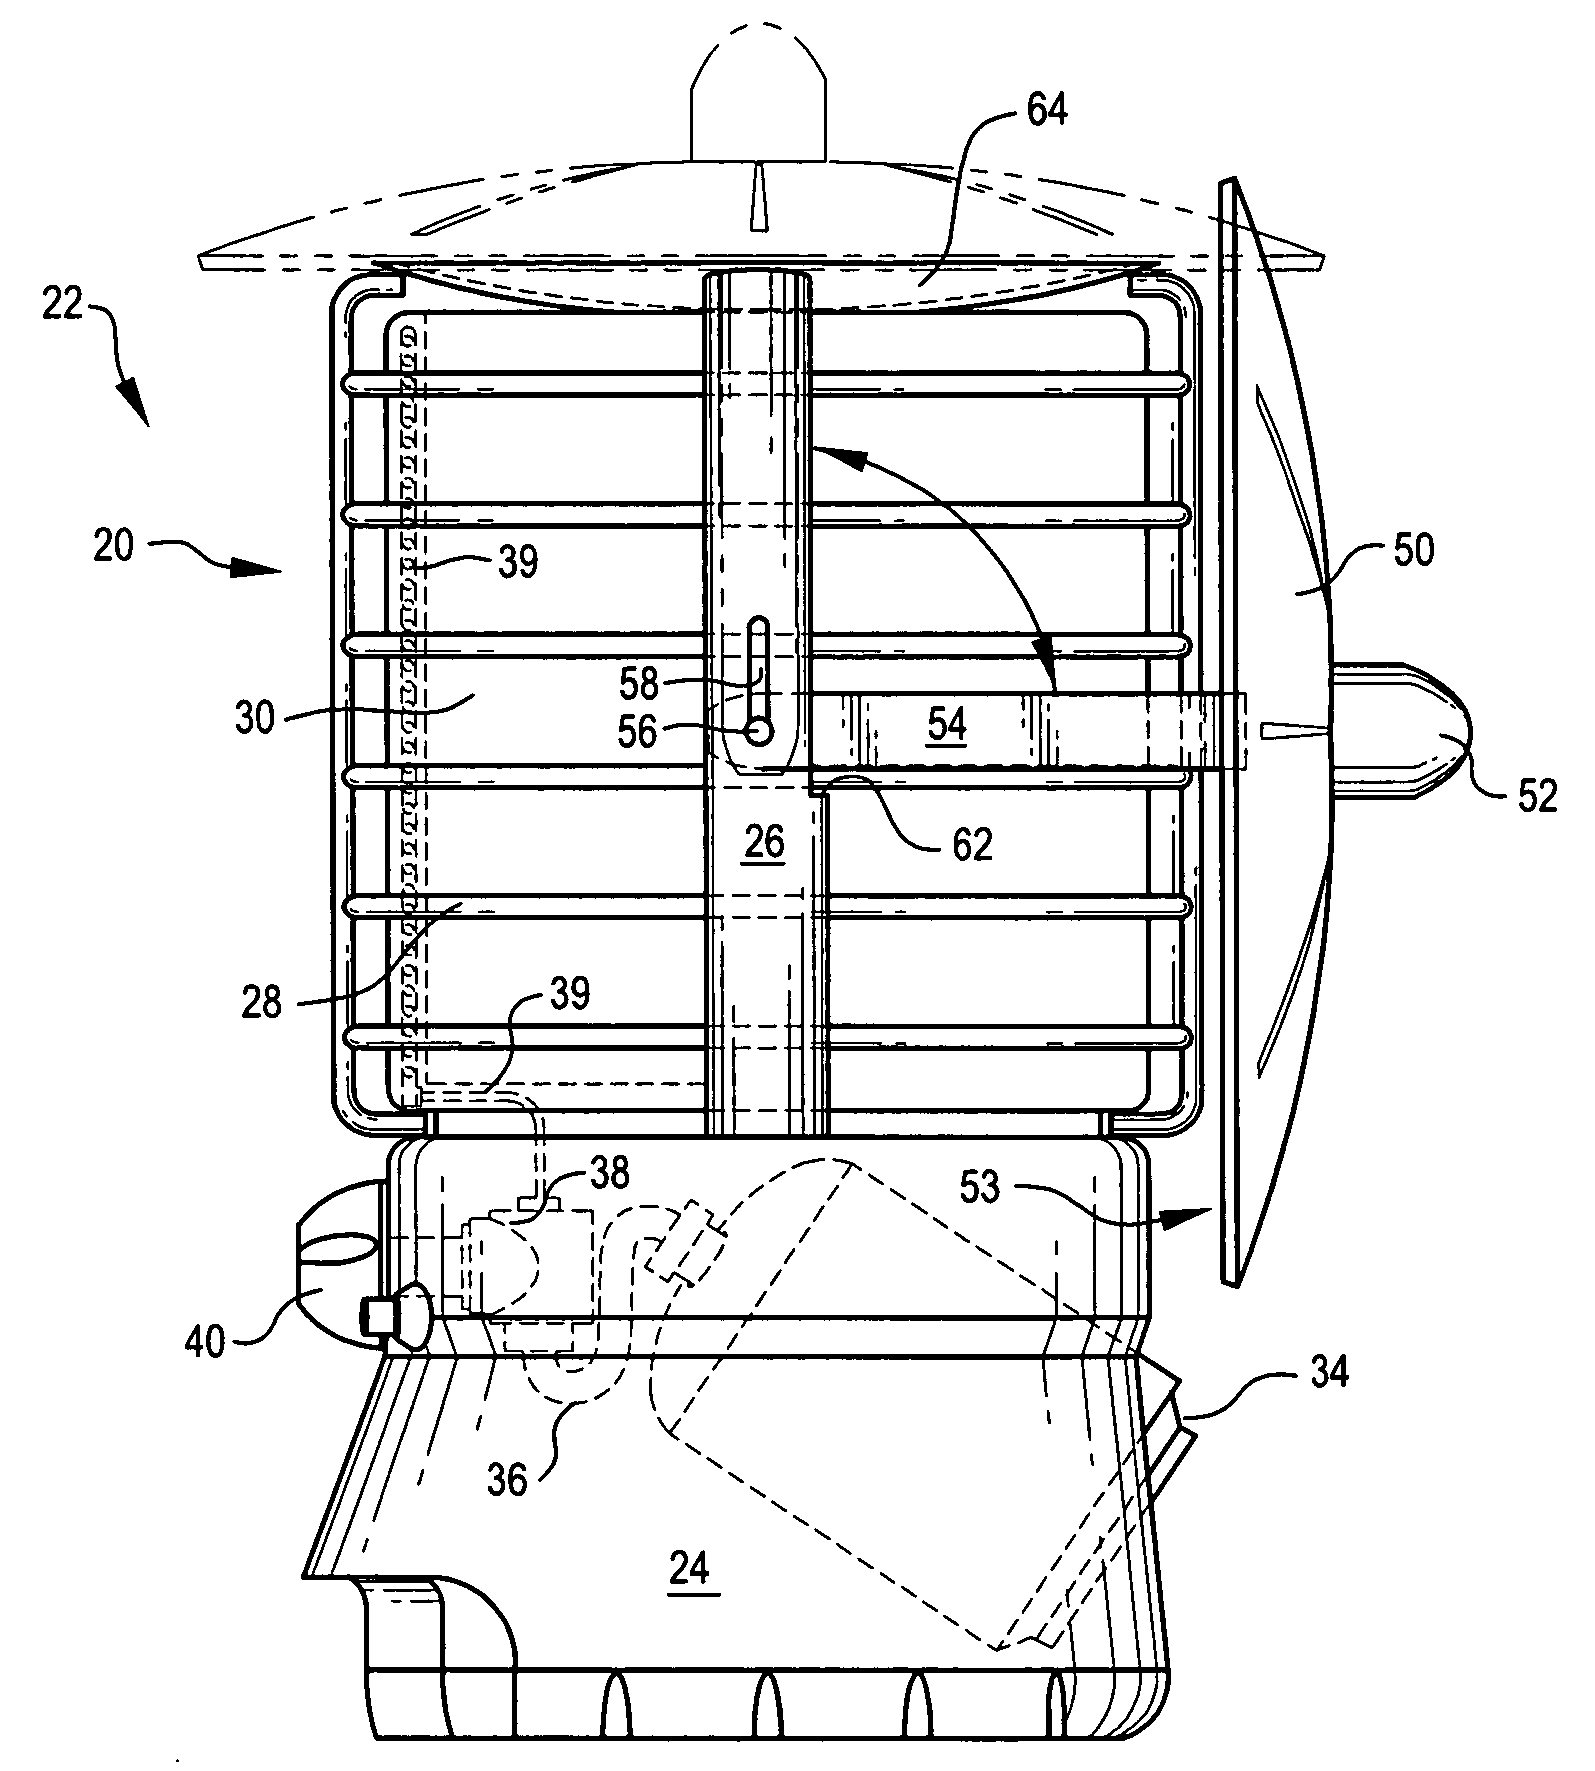 Cylindrical catalytic heater